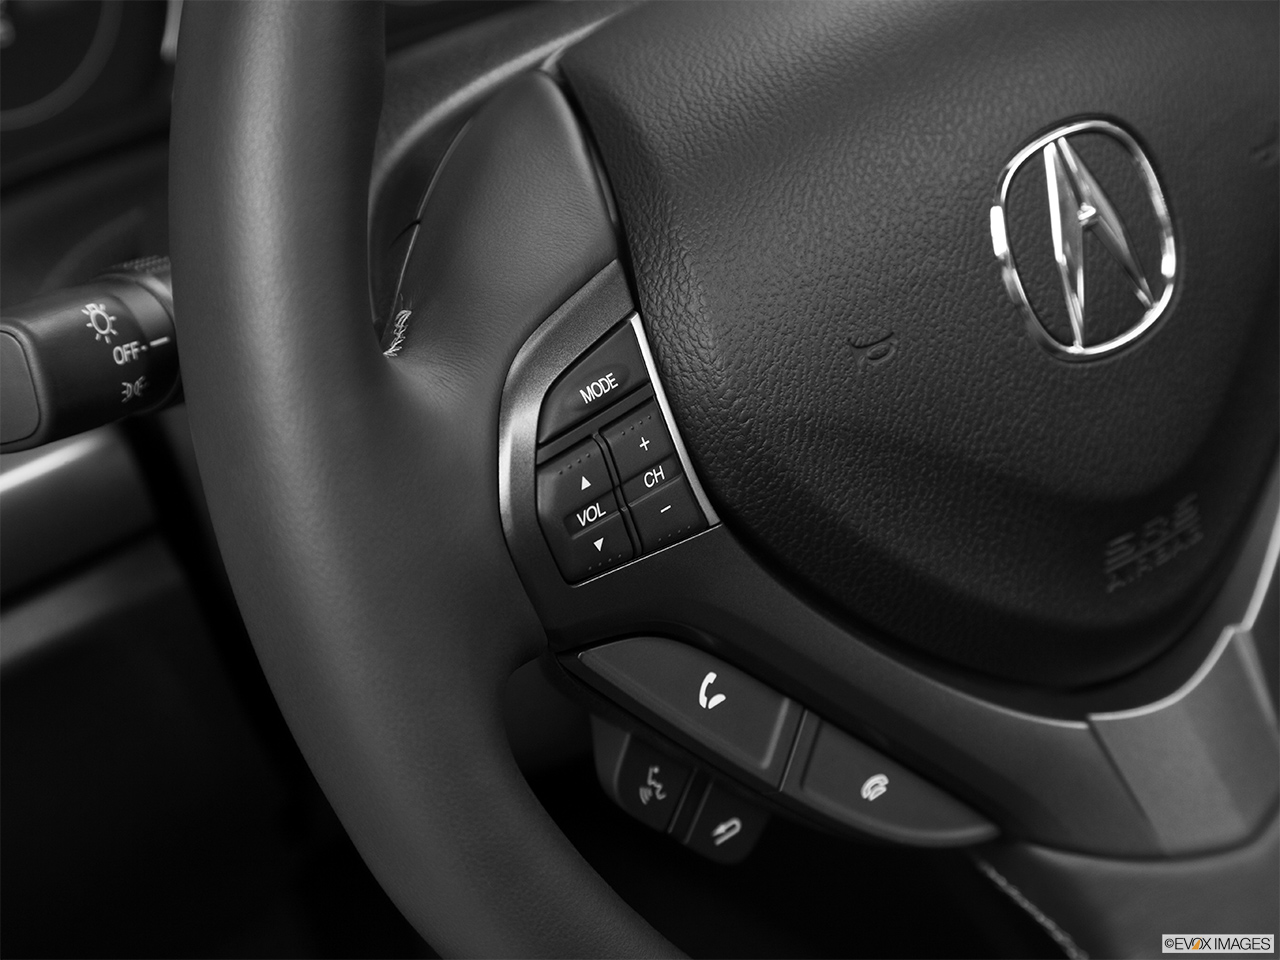 2013 Acura TSX 5-Speed Automatic Steering Wheel Controls (Left Side) 